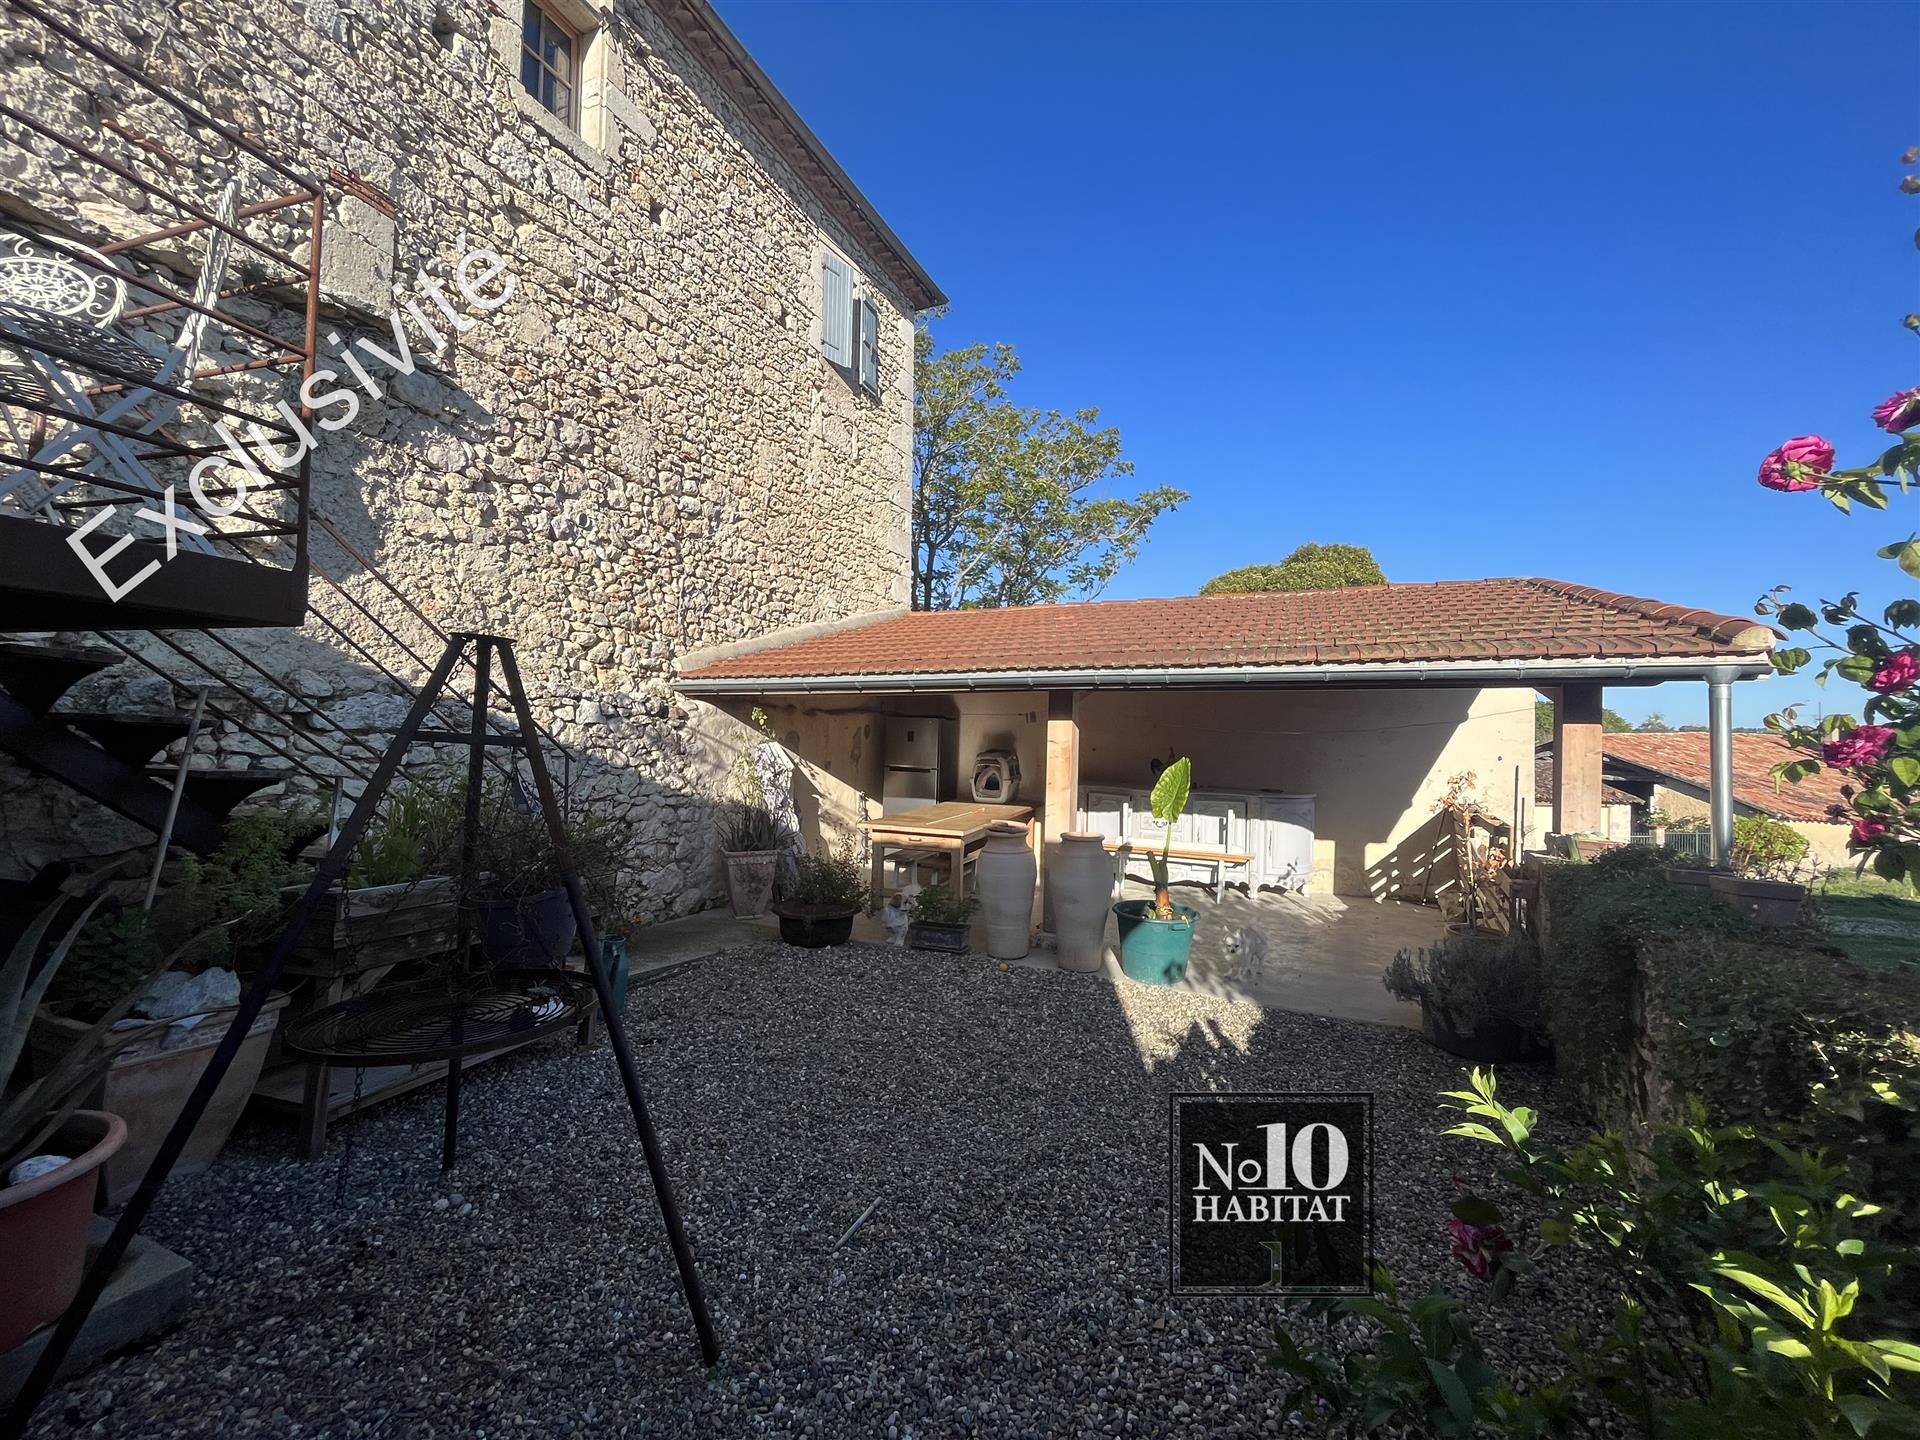 Stone house 110m² - 3 bedrooms - Garden - Pyrenees view